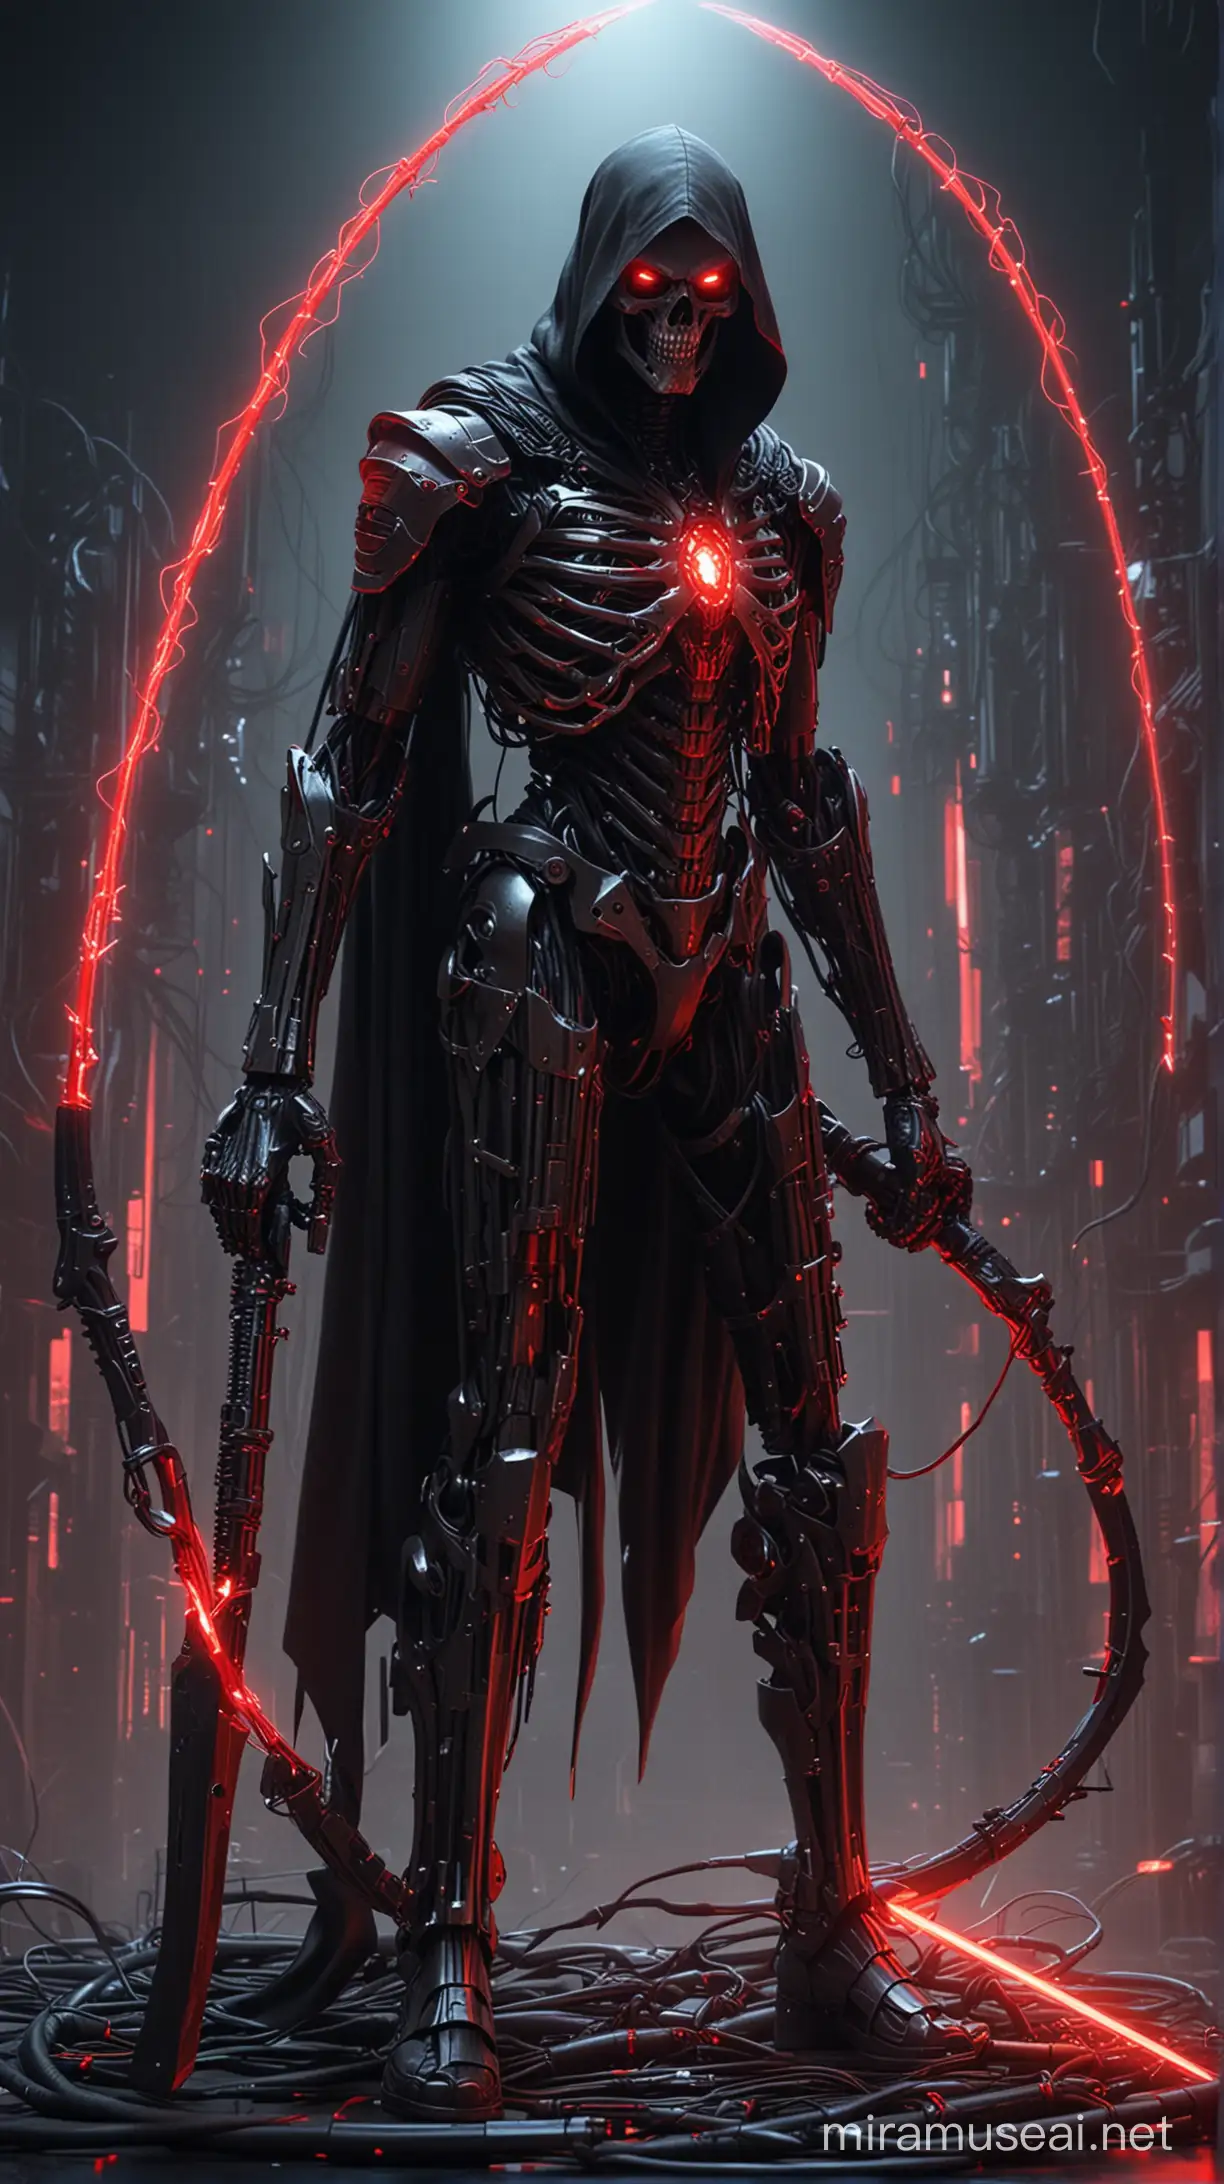 Cybernetically Enhanced Grim Reaper with Futuristic Laser Scythe in Dystopian Cityscape